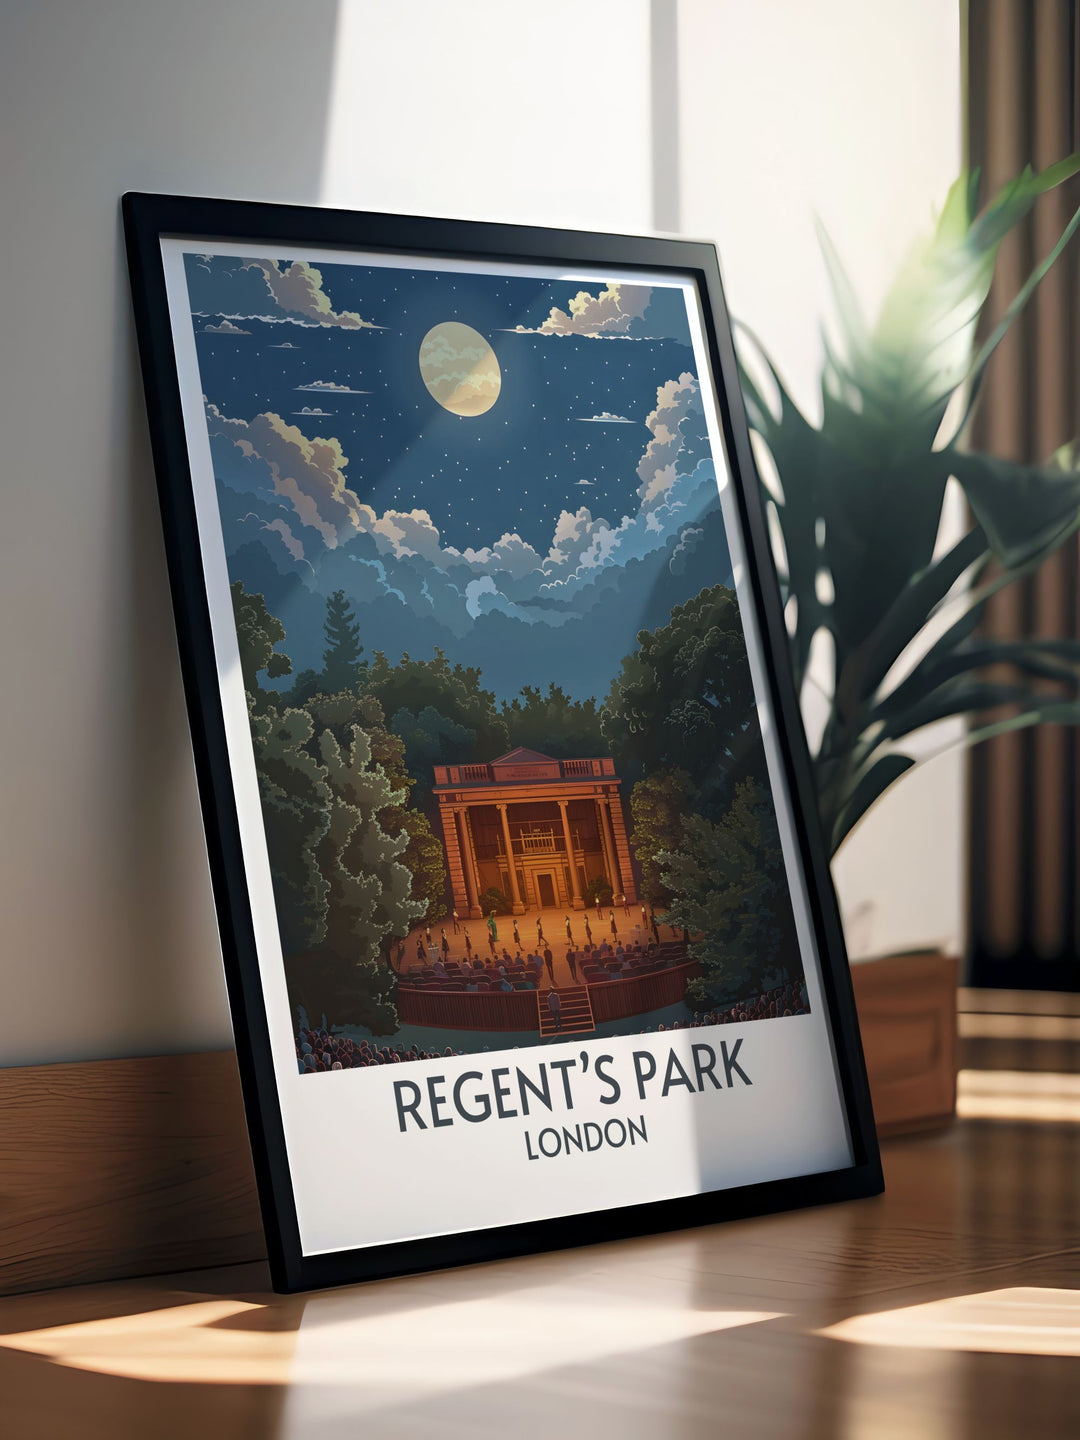 London Canvas Art featuring iconic scenes from North West London, including Regents Park and the Regents Bandstand, perfect for any decor.